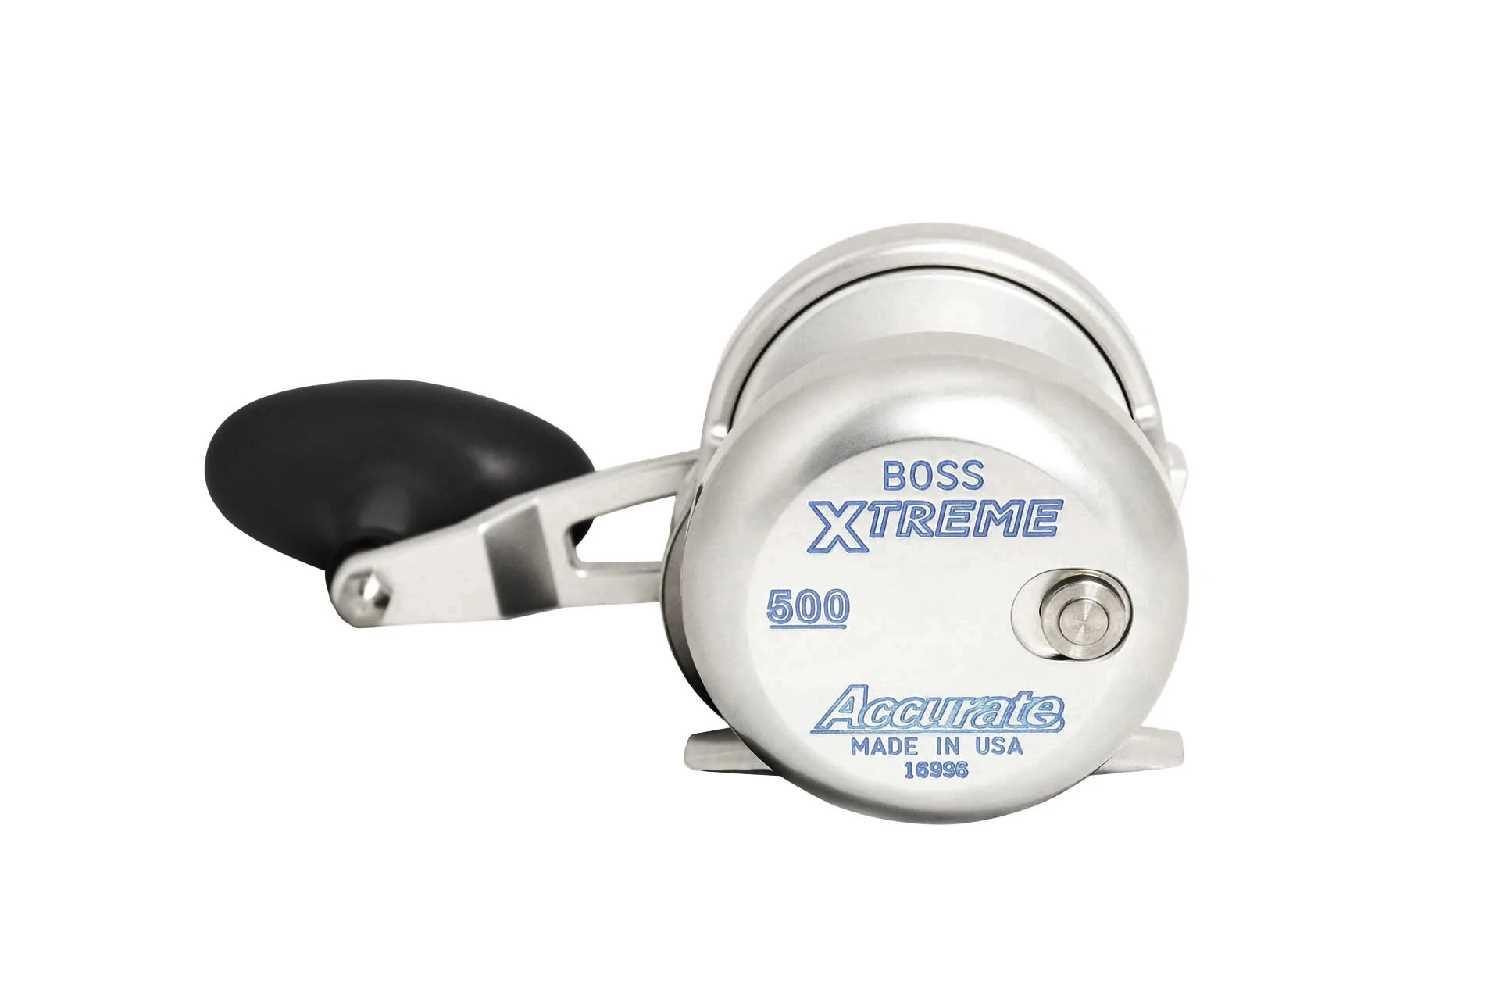 Accurate Boss Xtreme 400-S 2 Speed Reel